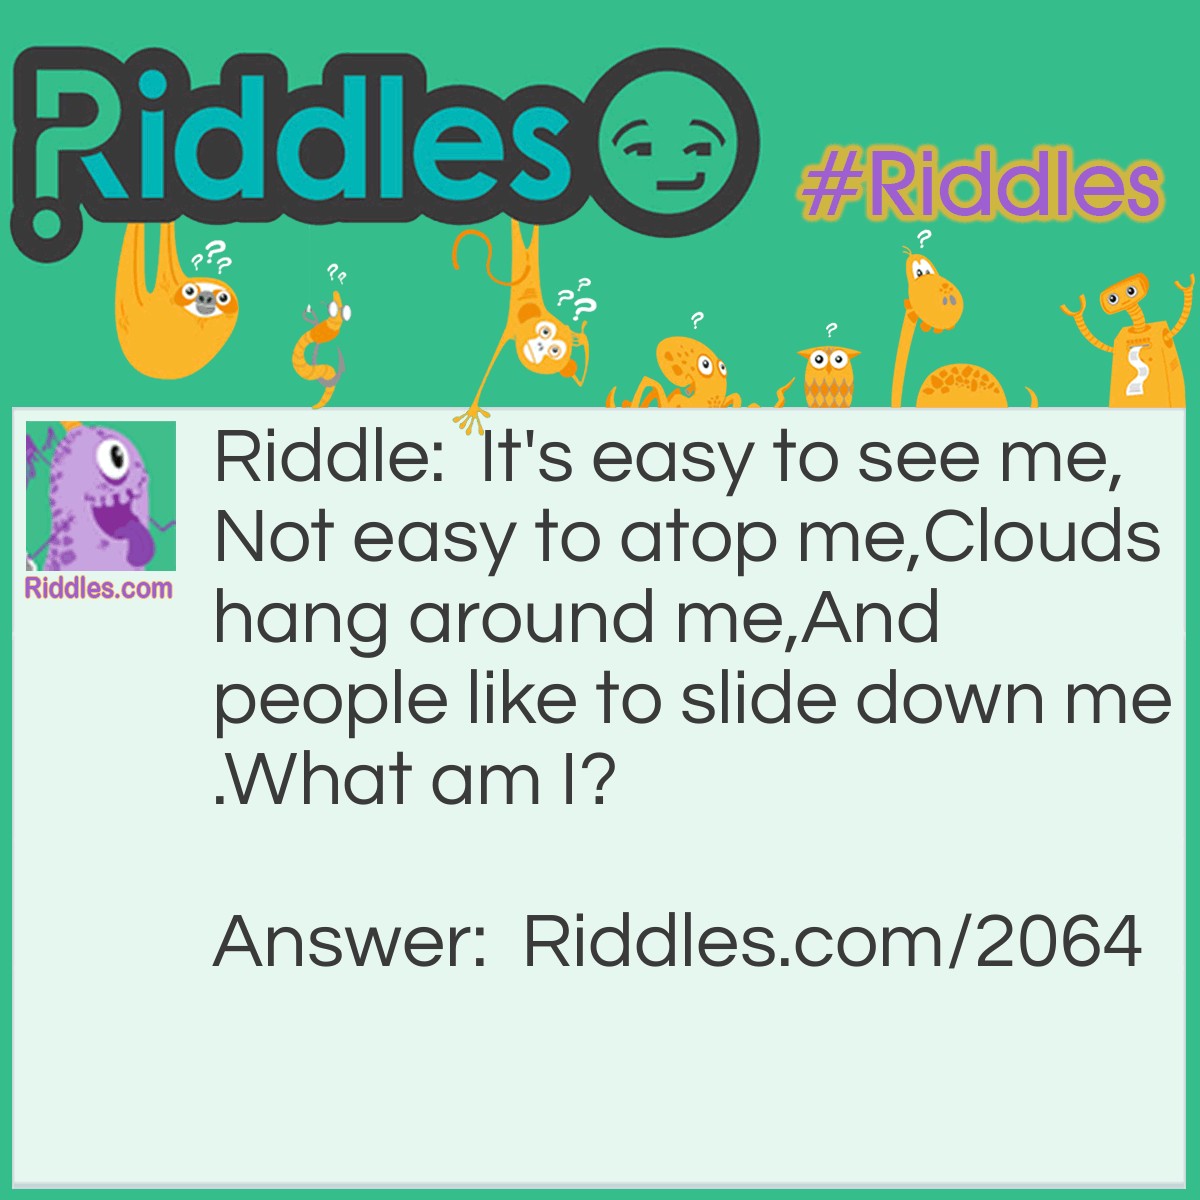 Riddle: It's easy to see me,
Not easy to atop me,
Clouds hang around me,
And people like to slide down me.
What am I? Answer: Mountain